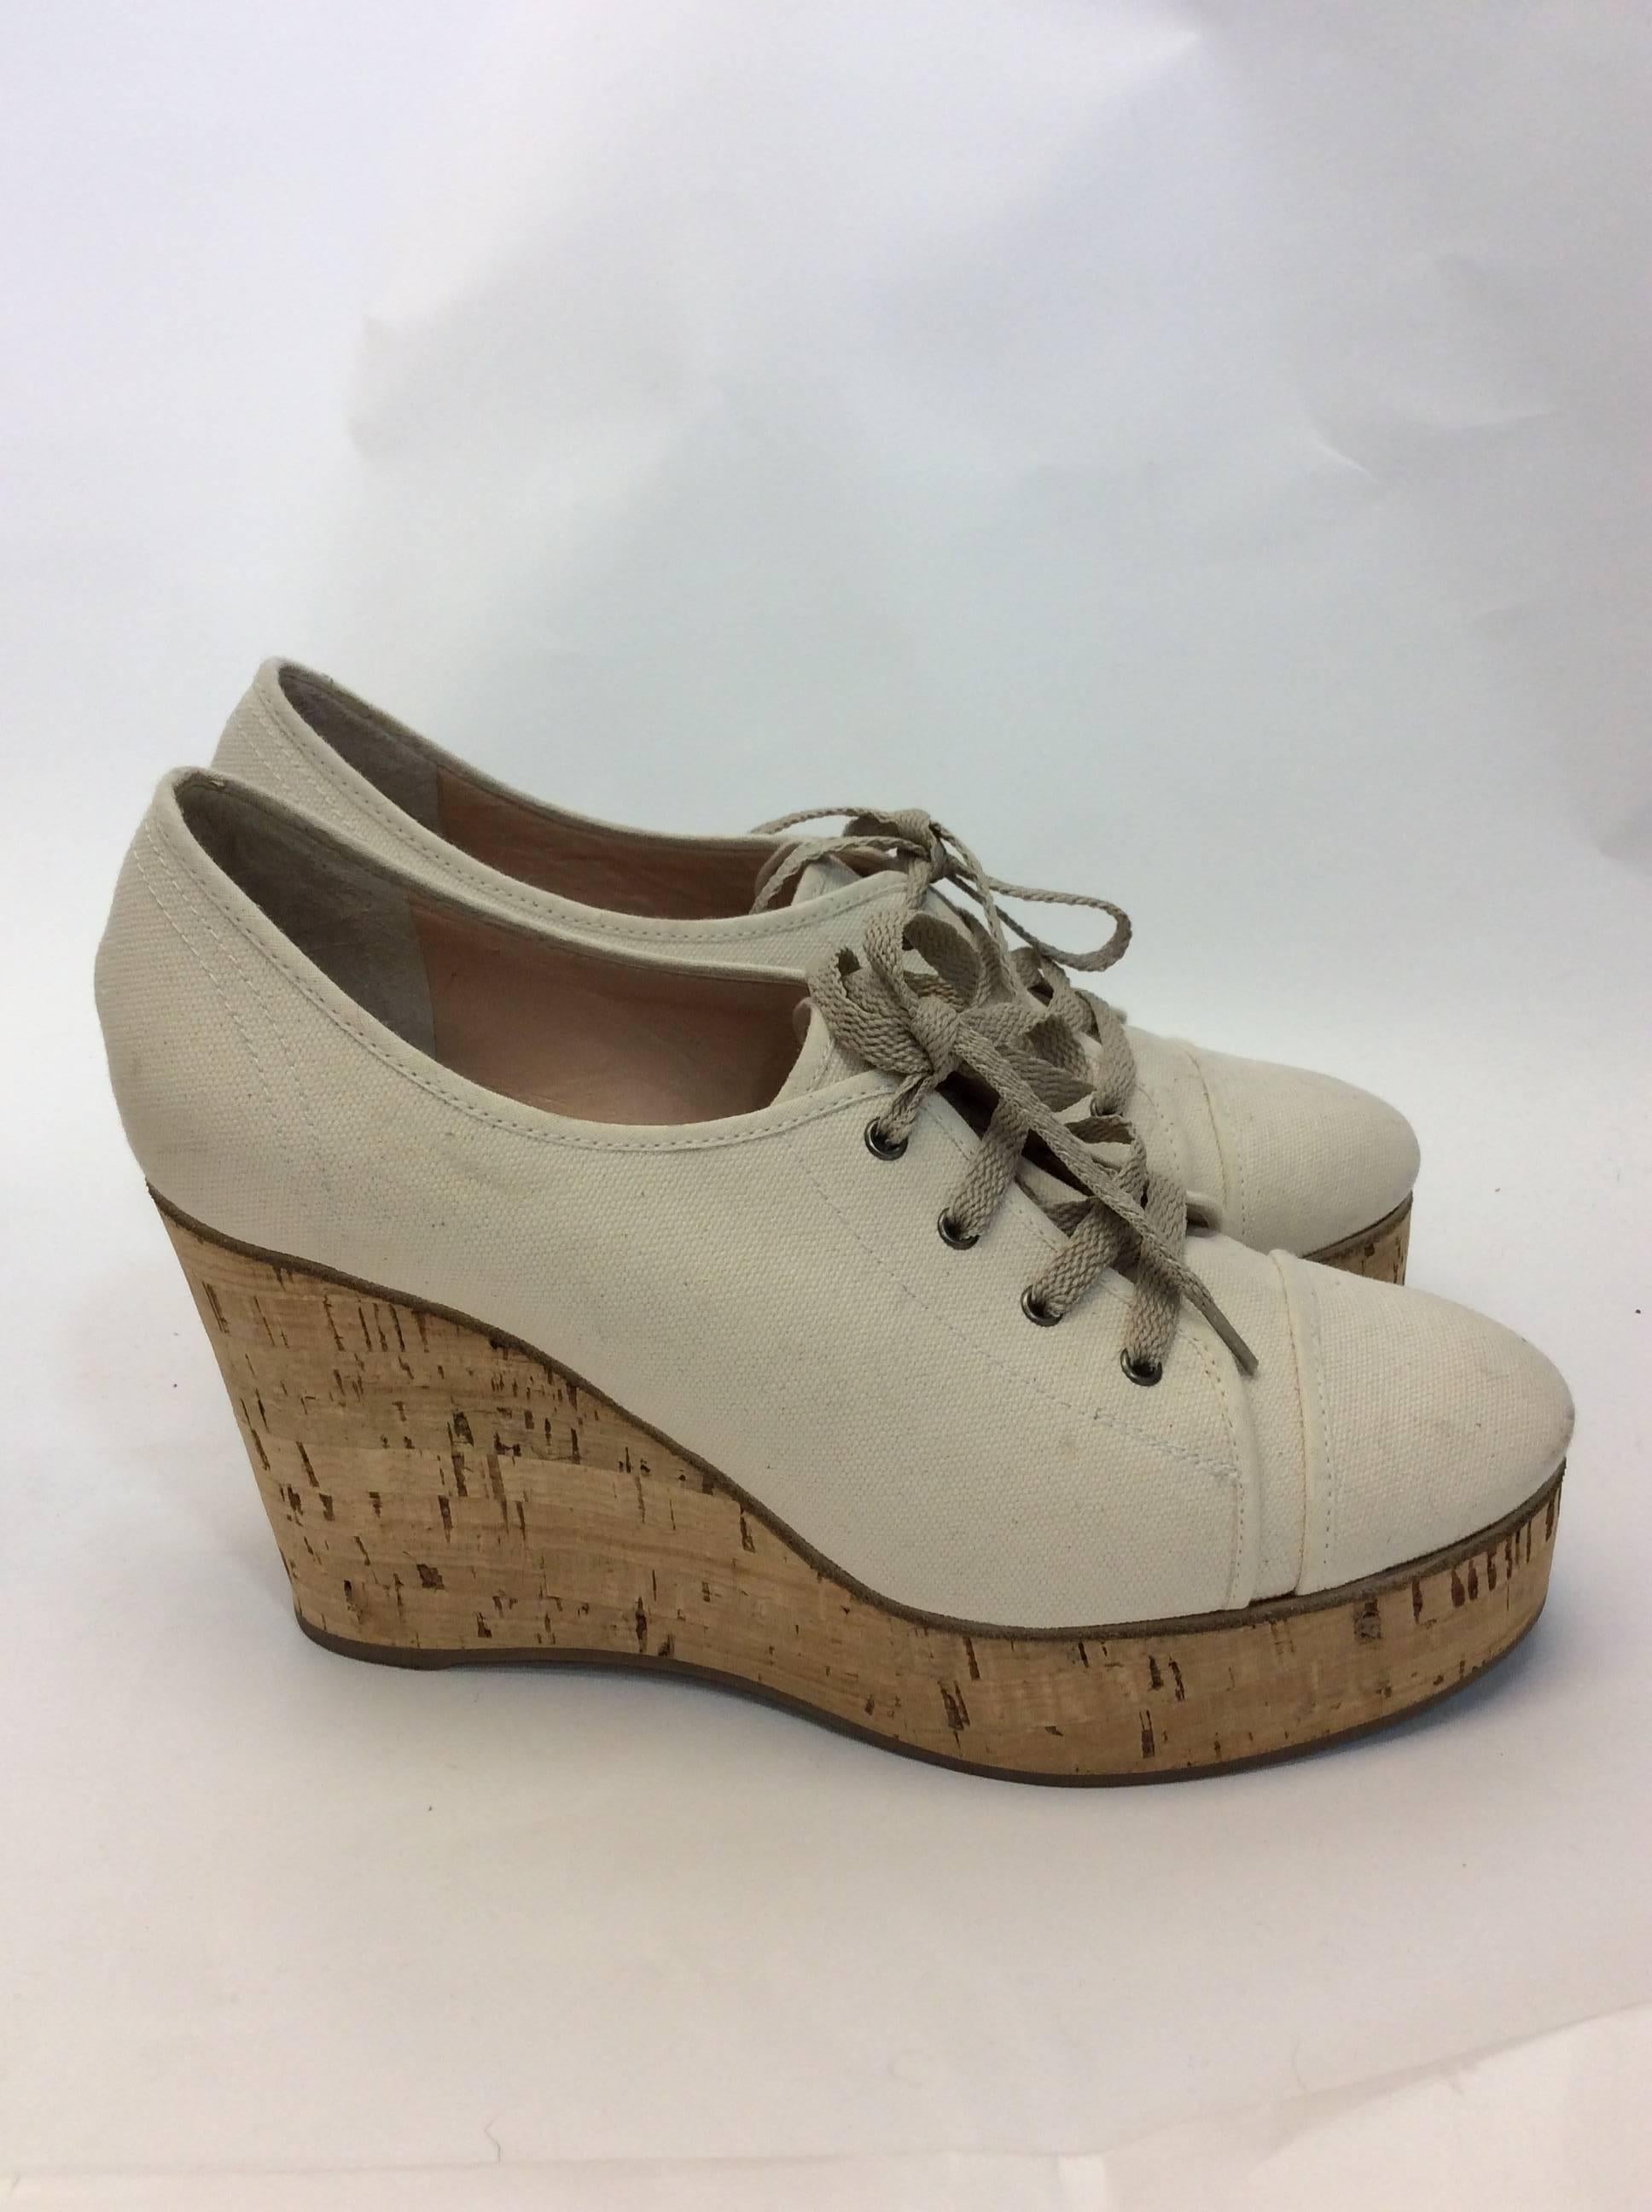 Chloe Cream Canvas Lace Up Wedge In Excellent Condition For Sale In Narberth, PA